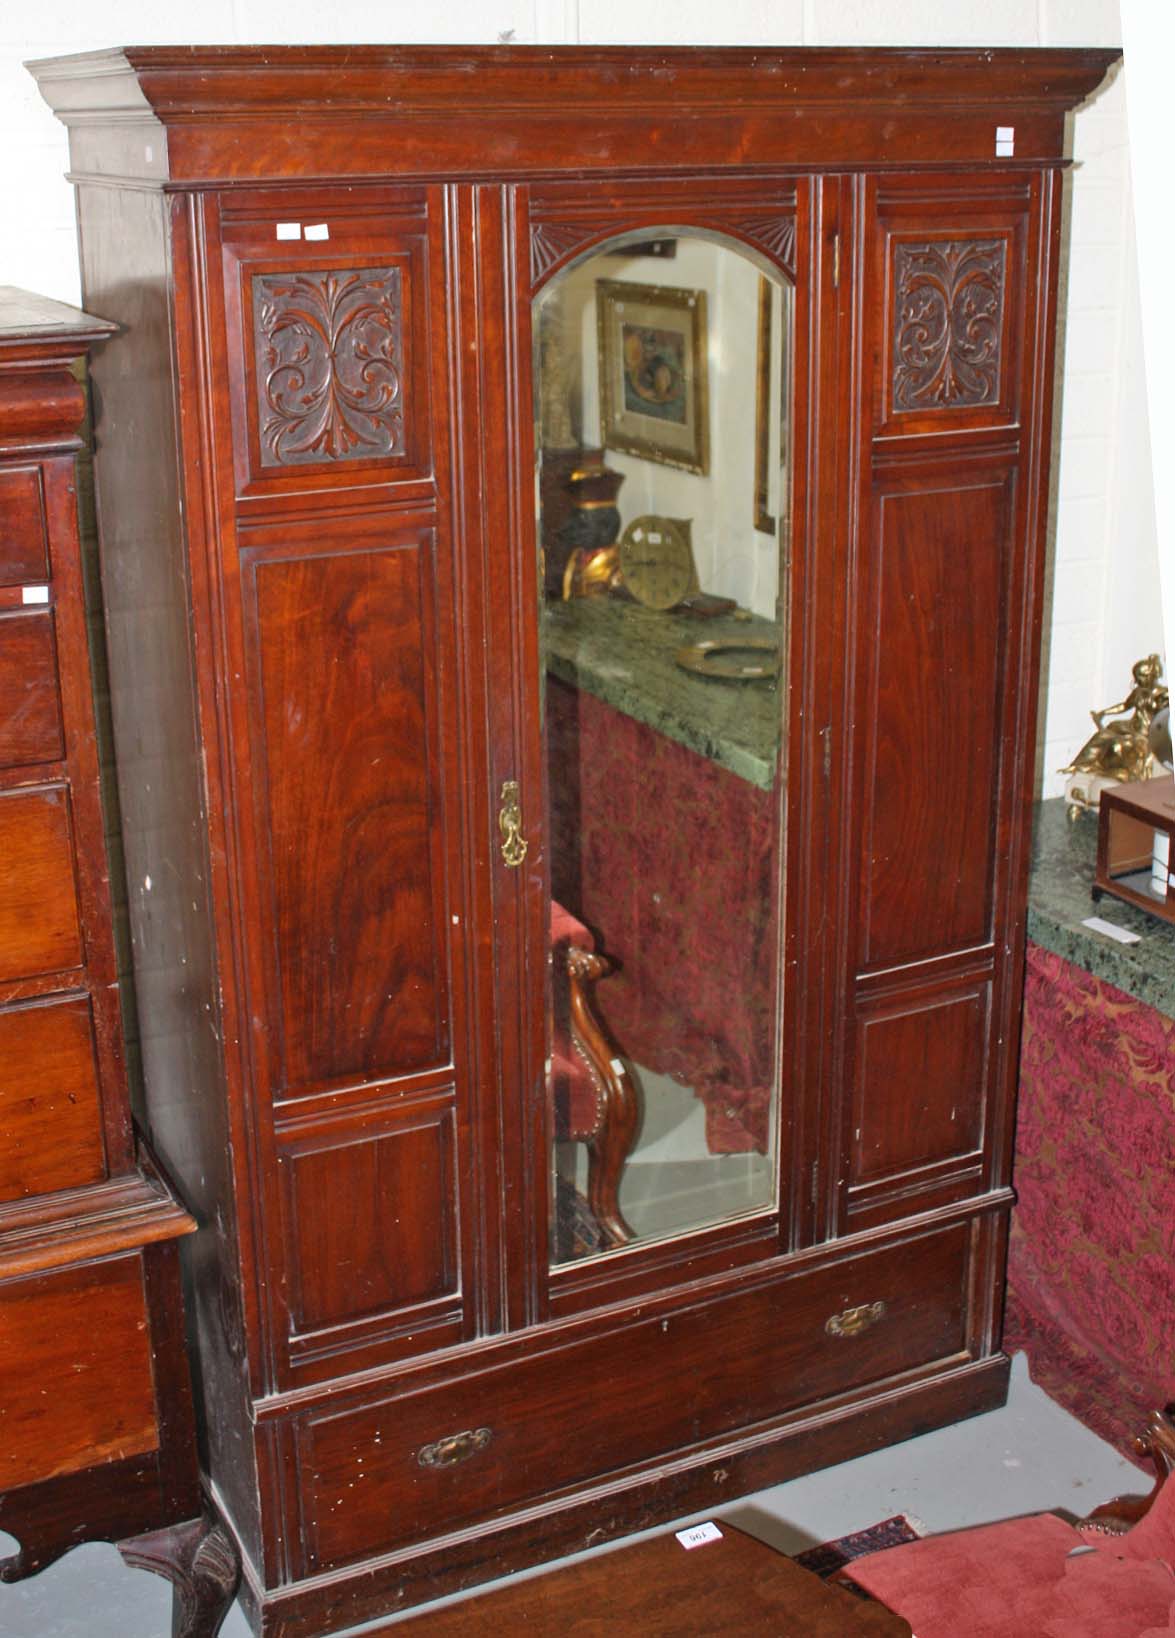 A WALNUT WARDROBE, early 20th century with moulded cornice and centre mirror door, 51in (130cm).